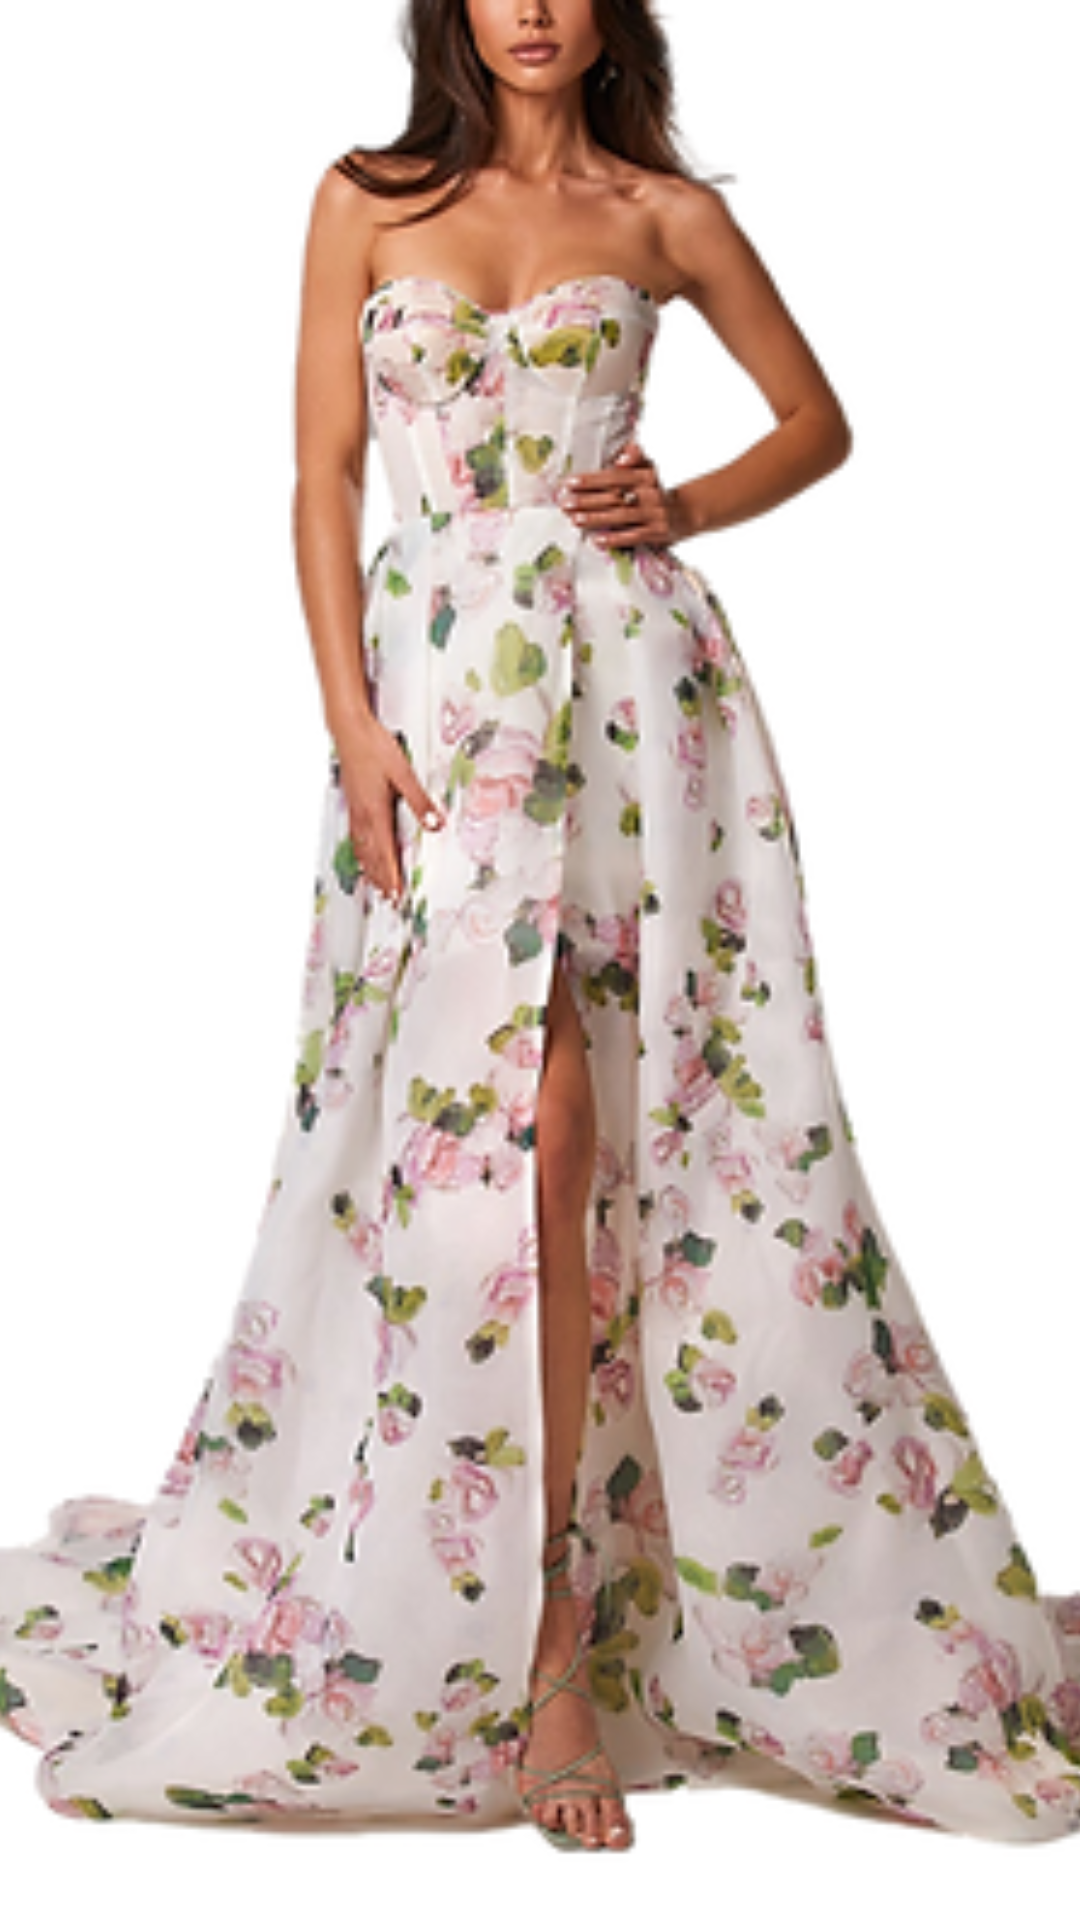 Milla Esther Floral Bustier Gown in Apple Blossom